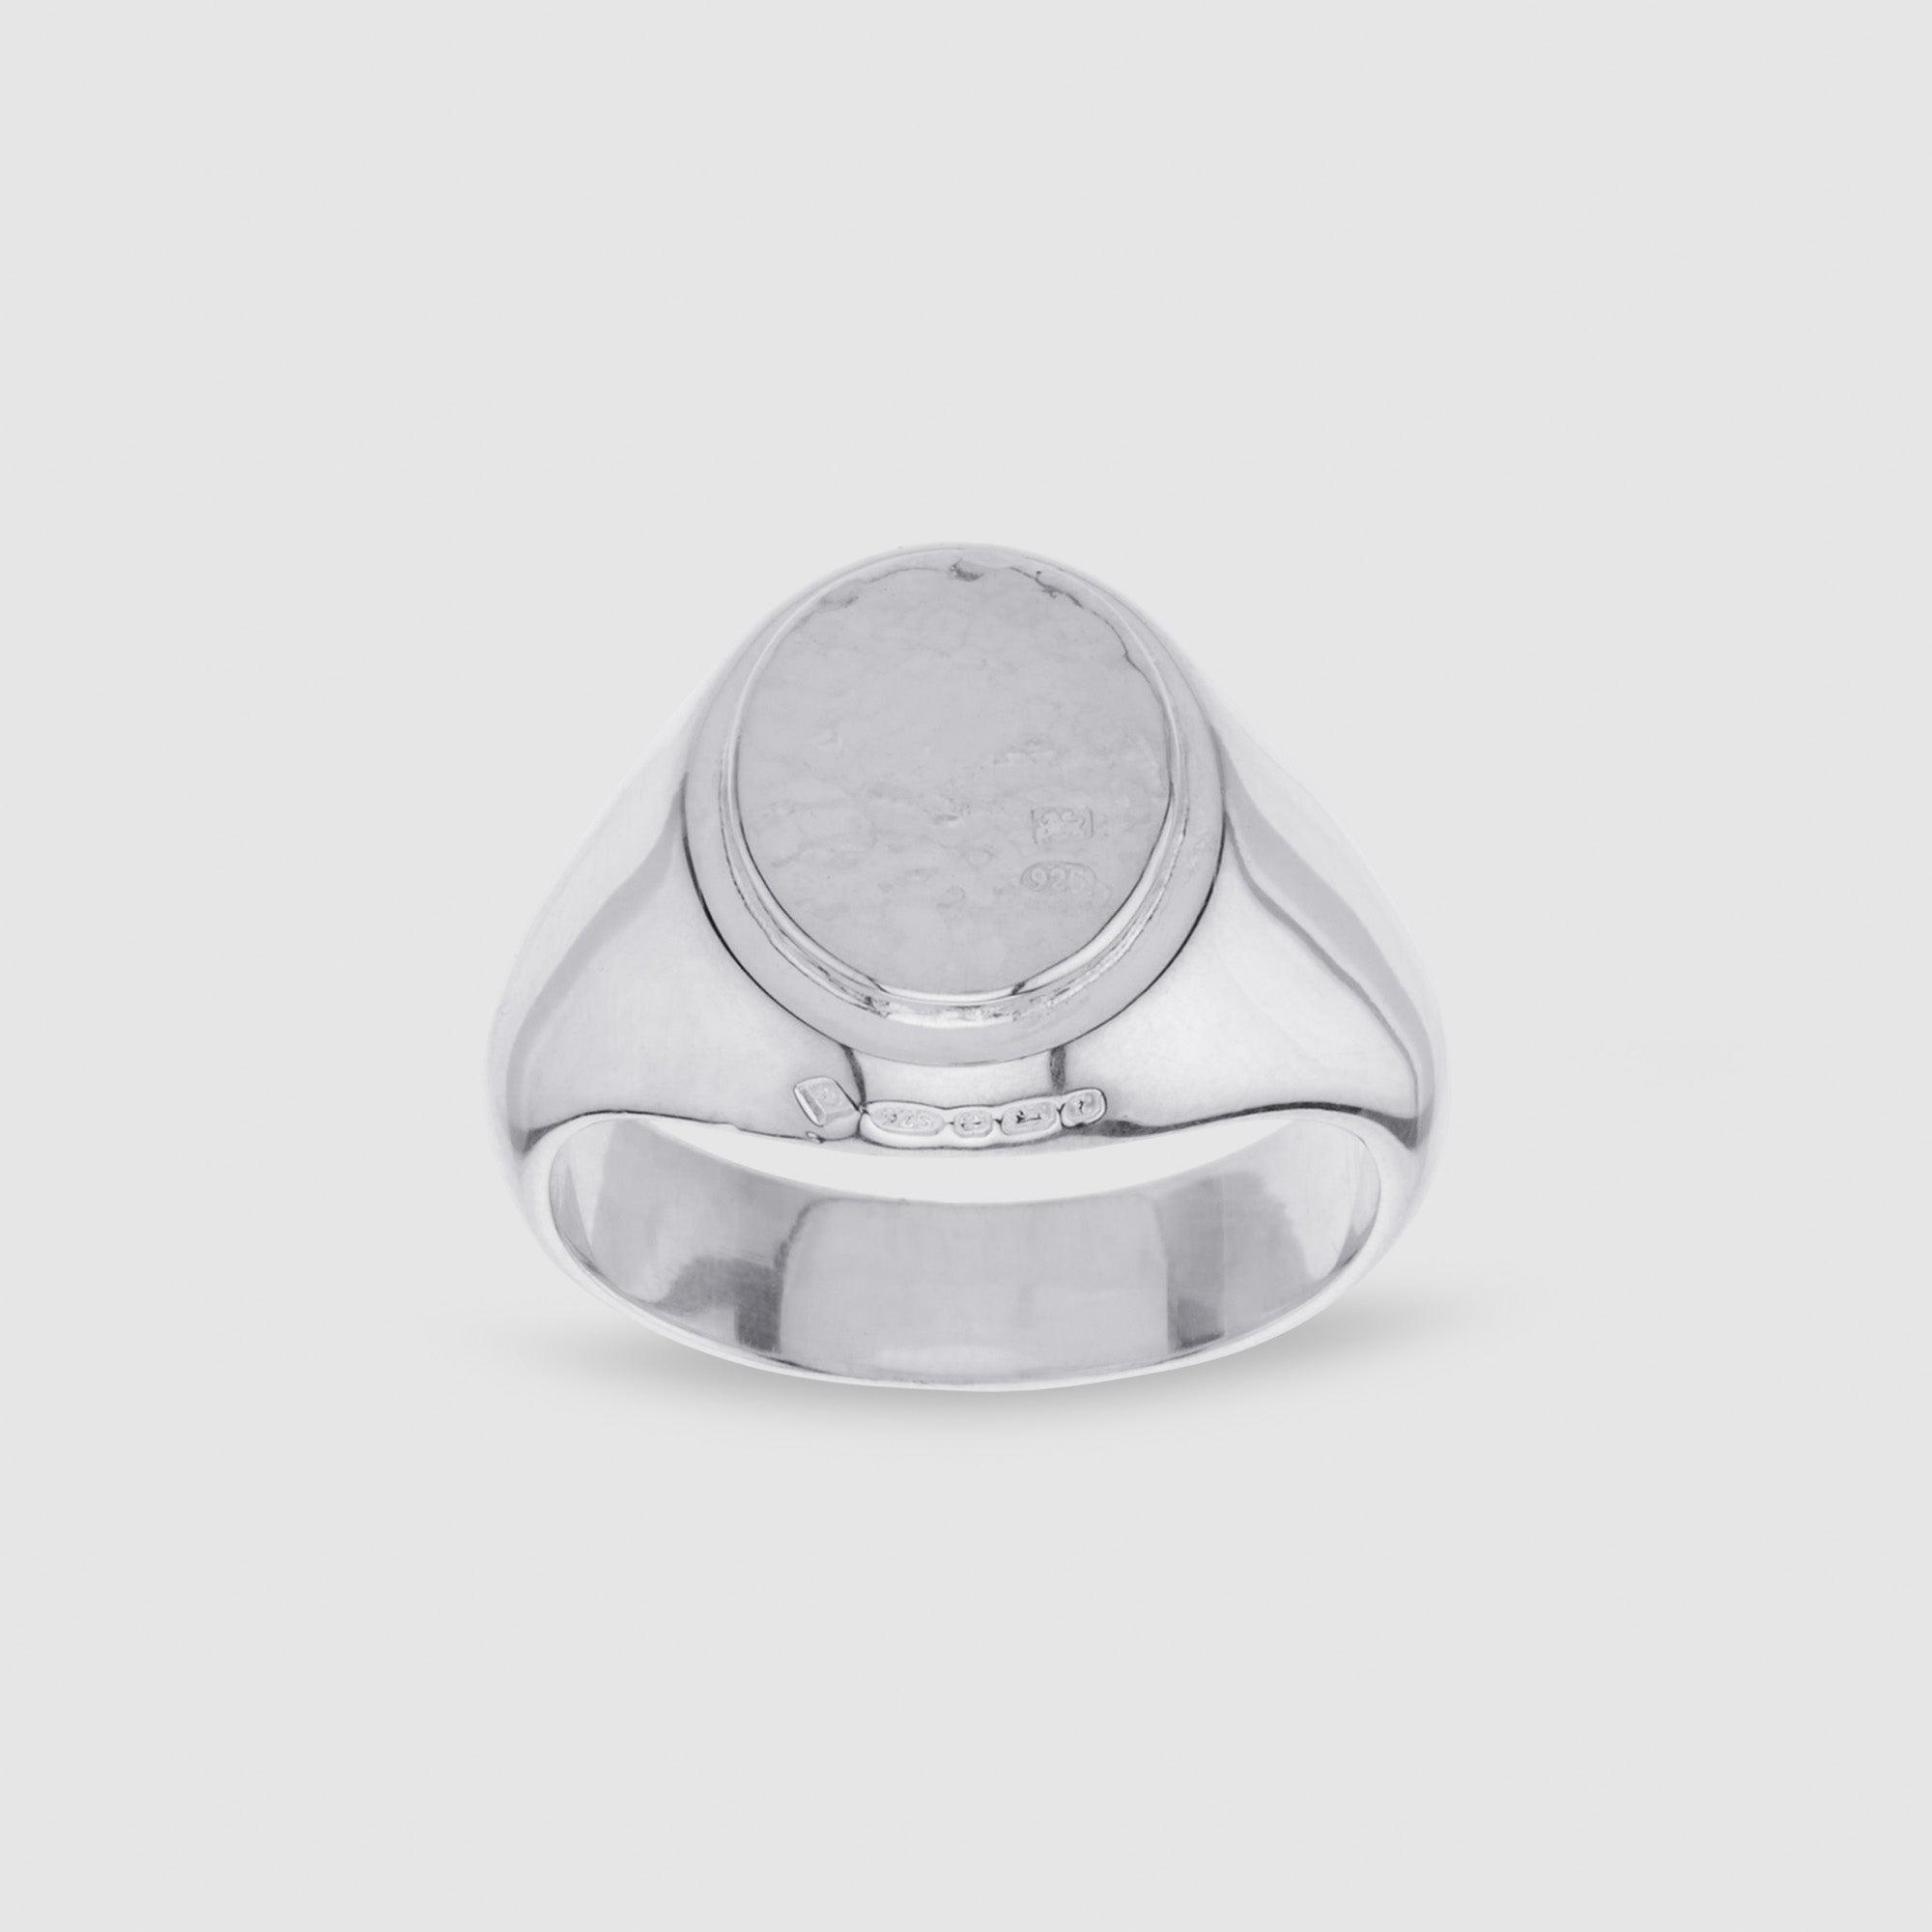 Bunney Oval Hammered Signet Ring by ANDREW BUNNEY